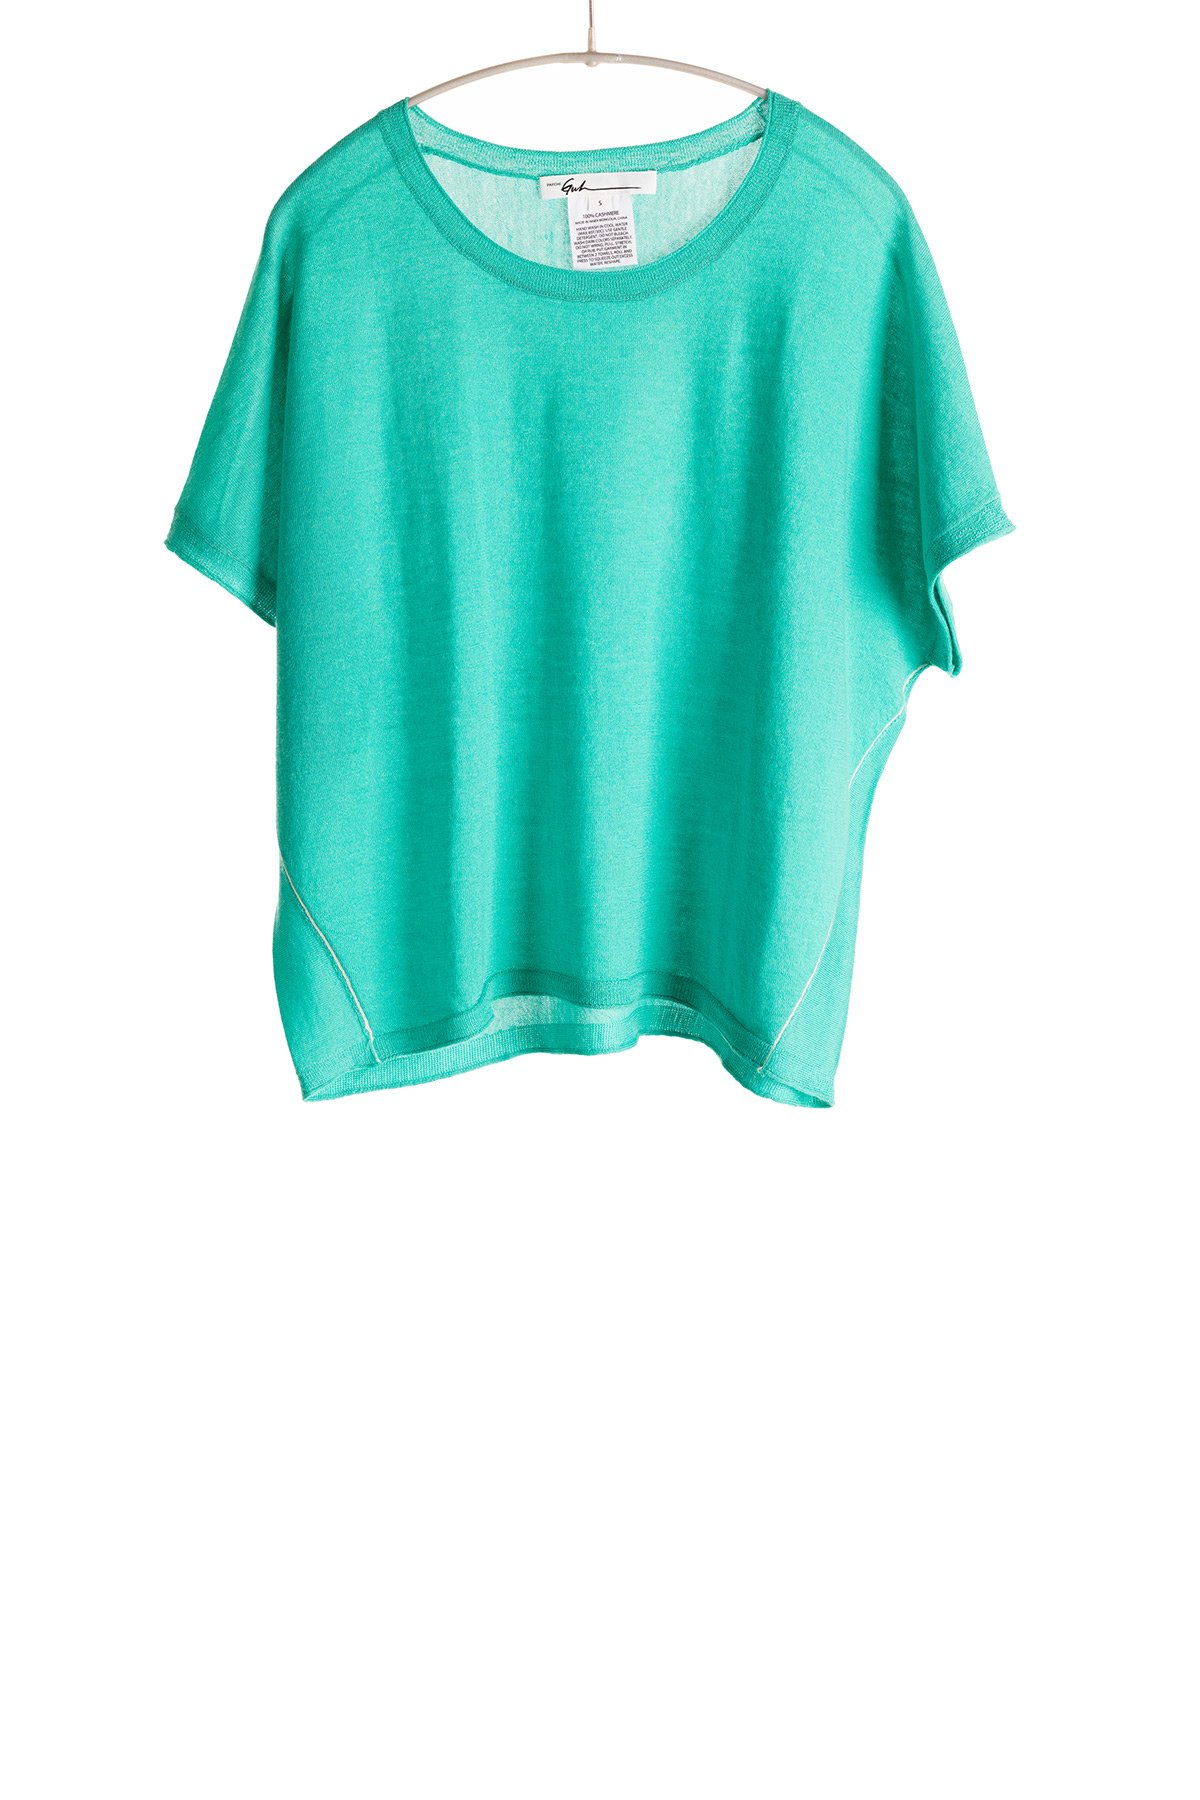 S409_Popover_Turquoise_H1Front